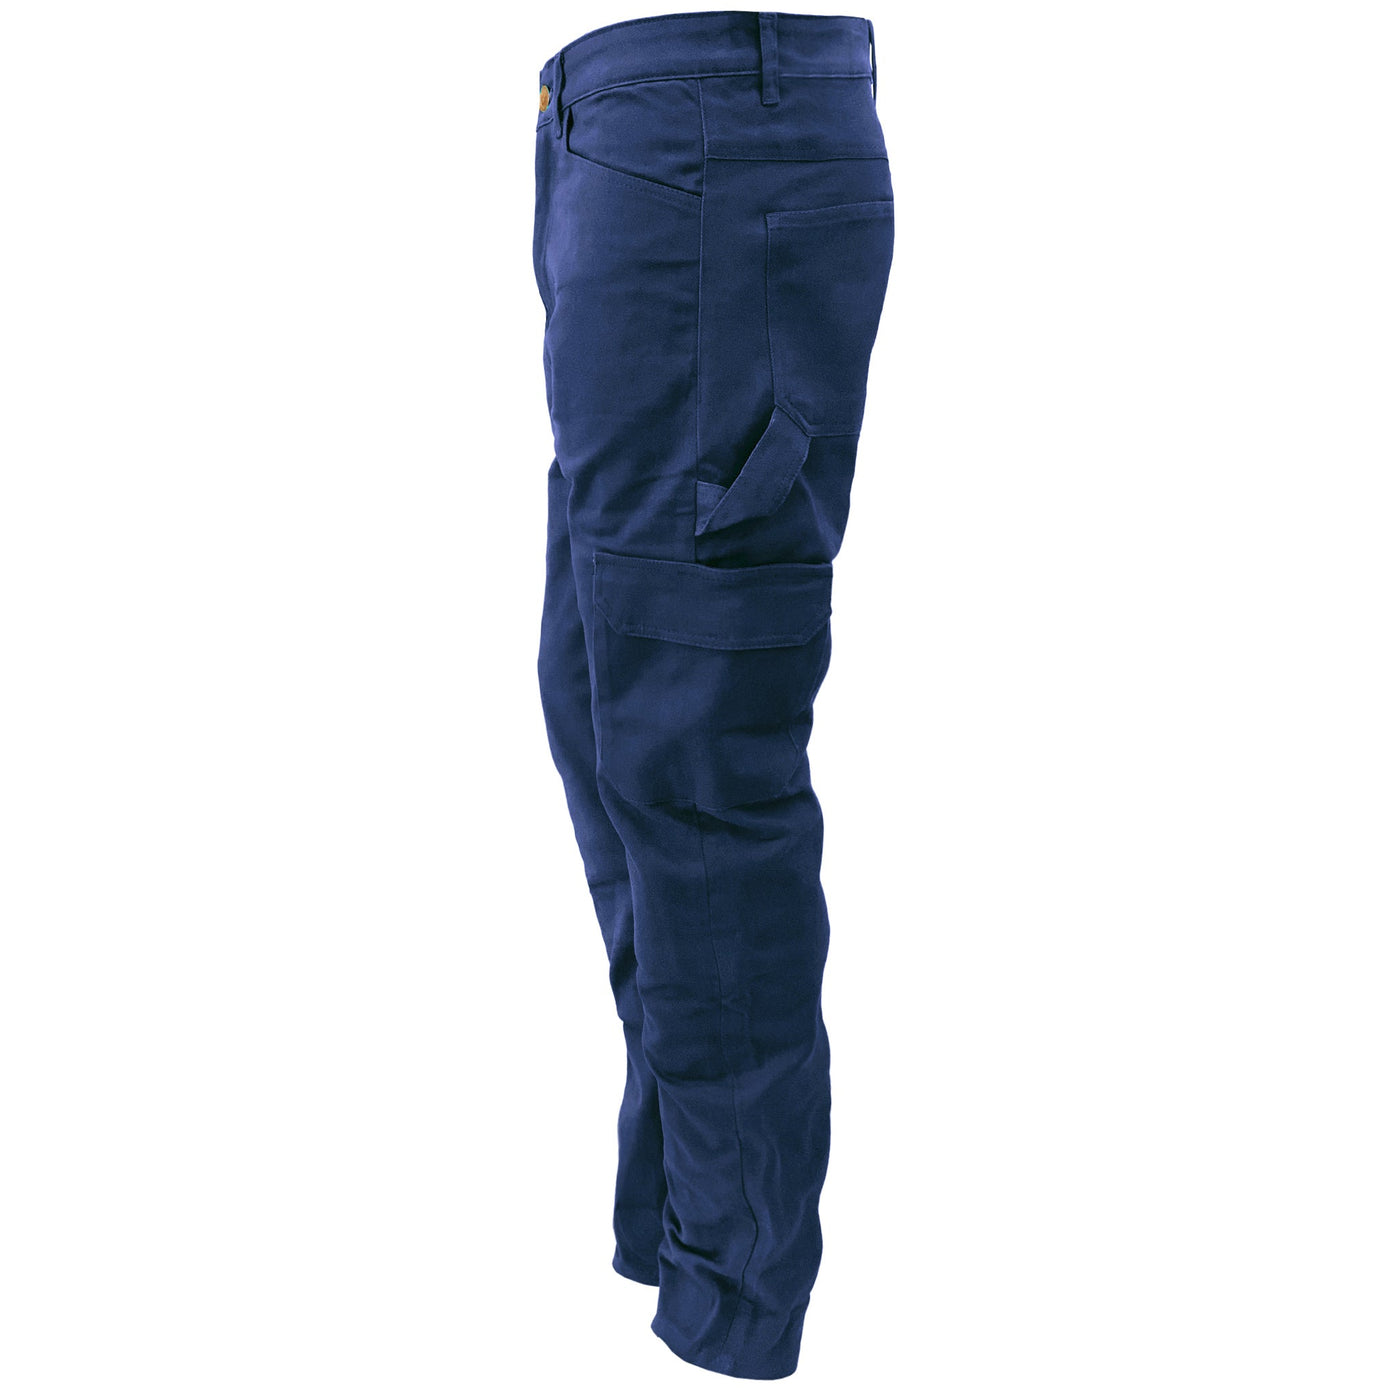 Relaxed Fit Cargo Pants with Pads - Navy Blue